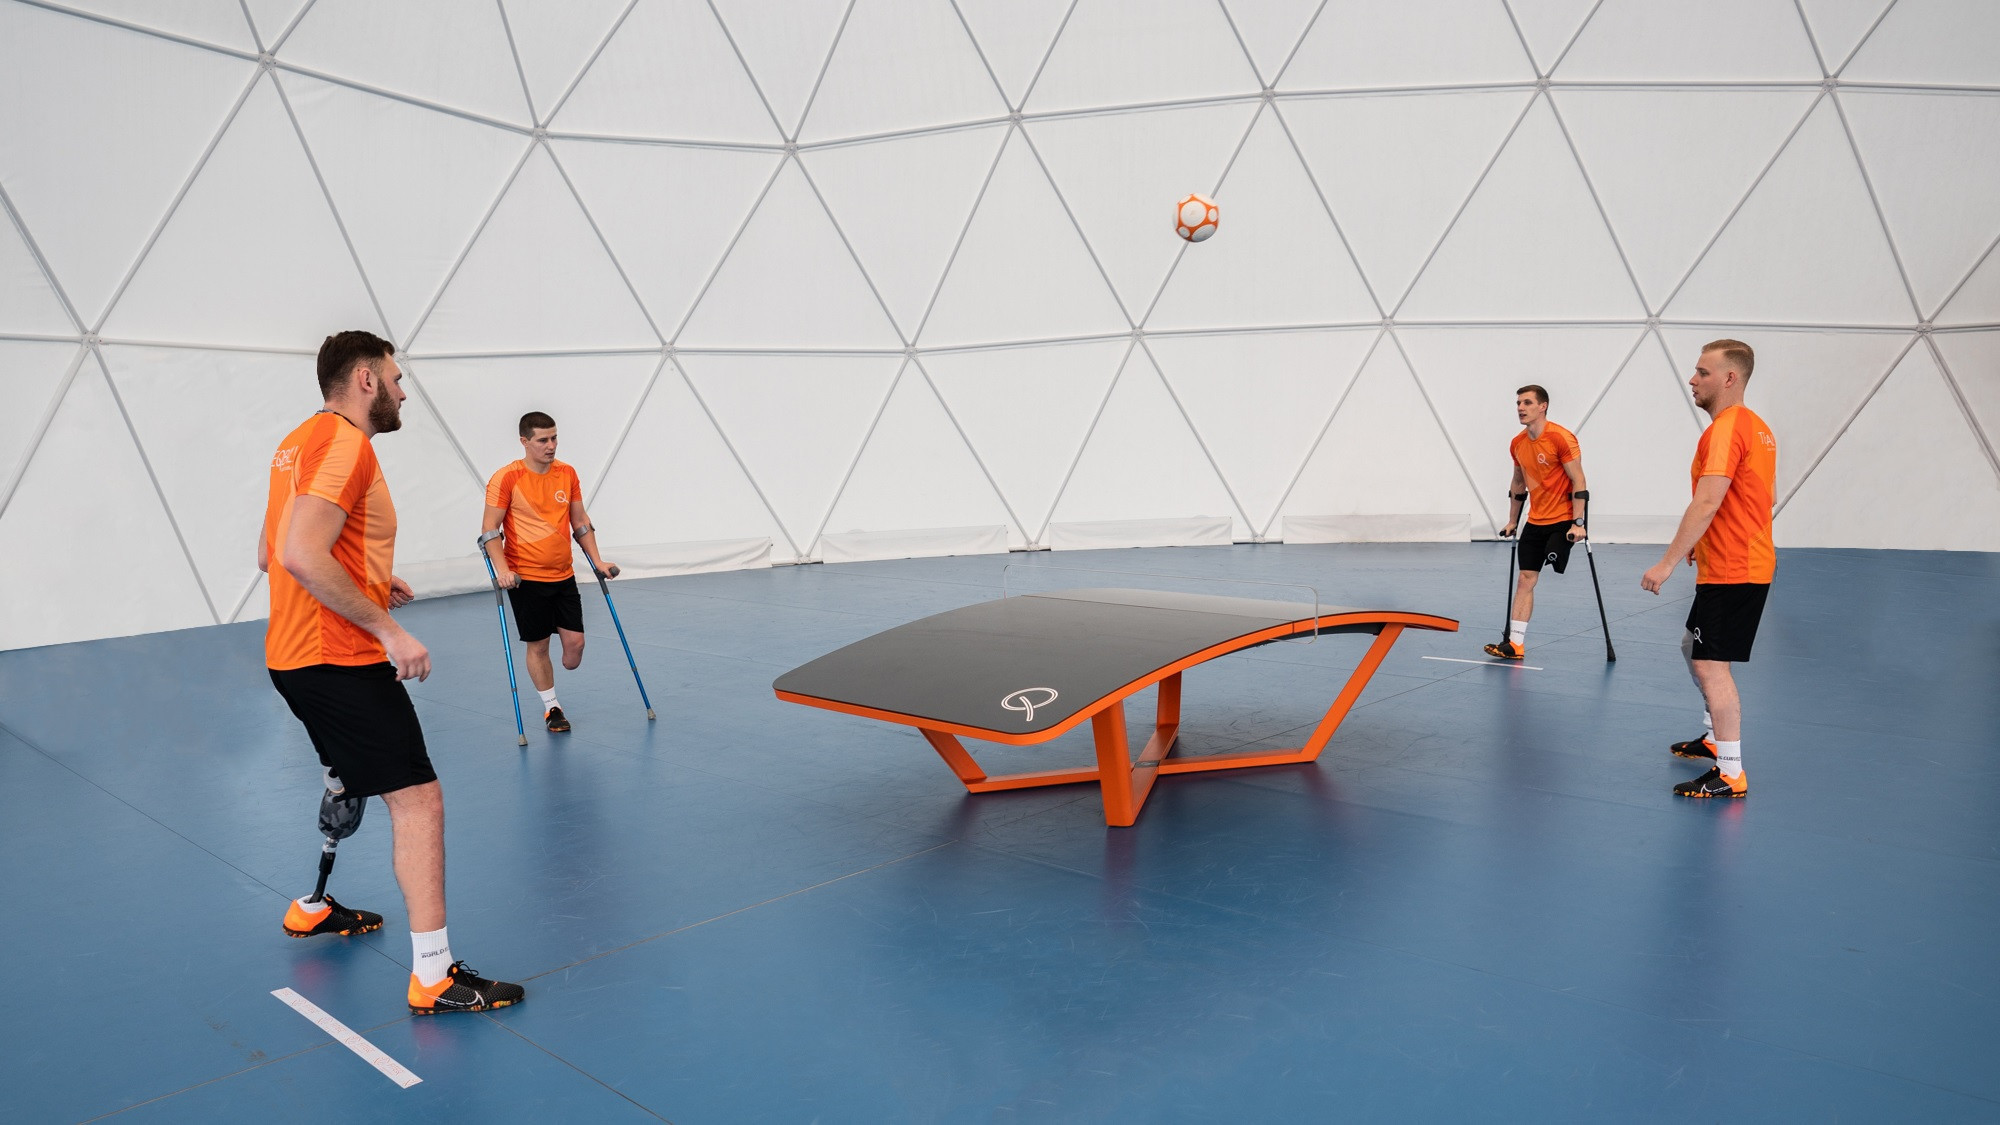 Para teqball was launched by FITEQ in March 2021 to make the sport 